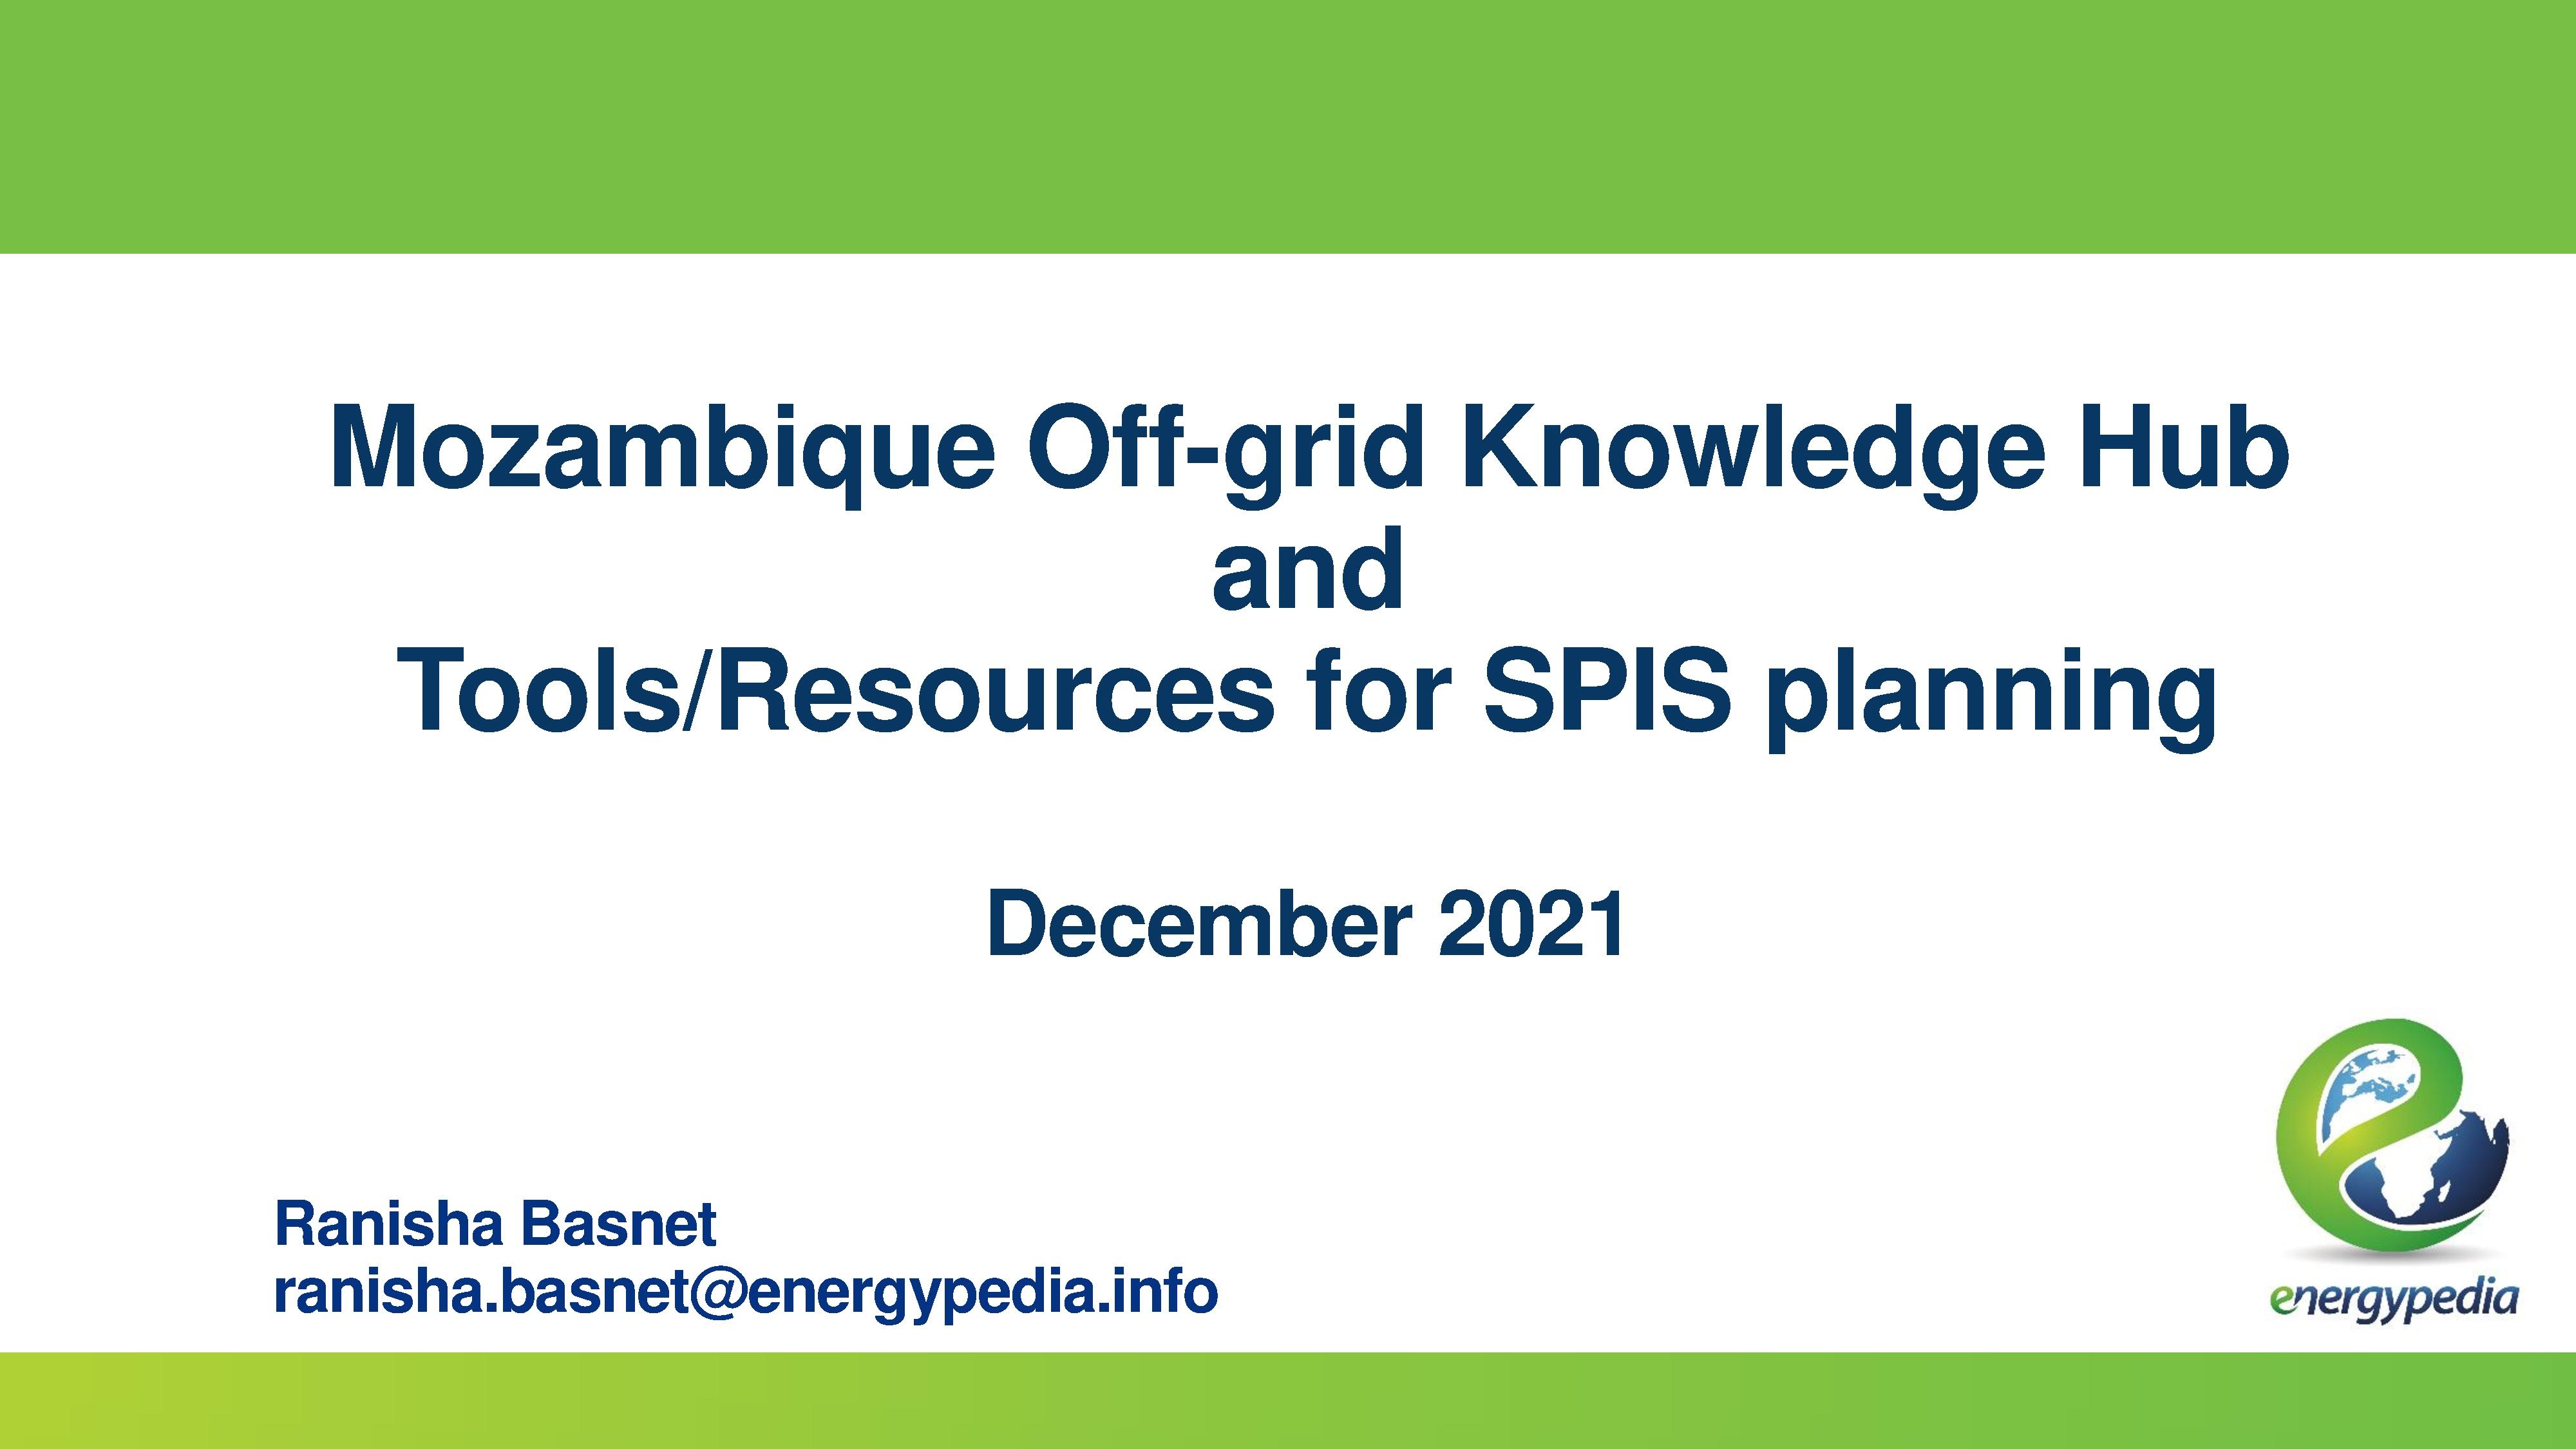 Introduction to Mozambique Off-grid Knowledge Hub on energypedia and overview of tools and resources for SPIS planning